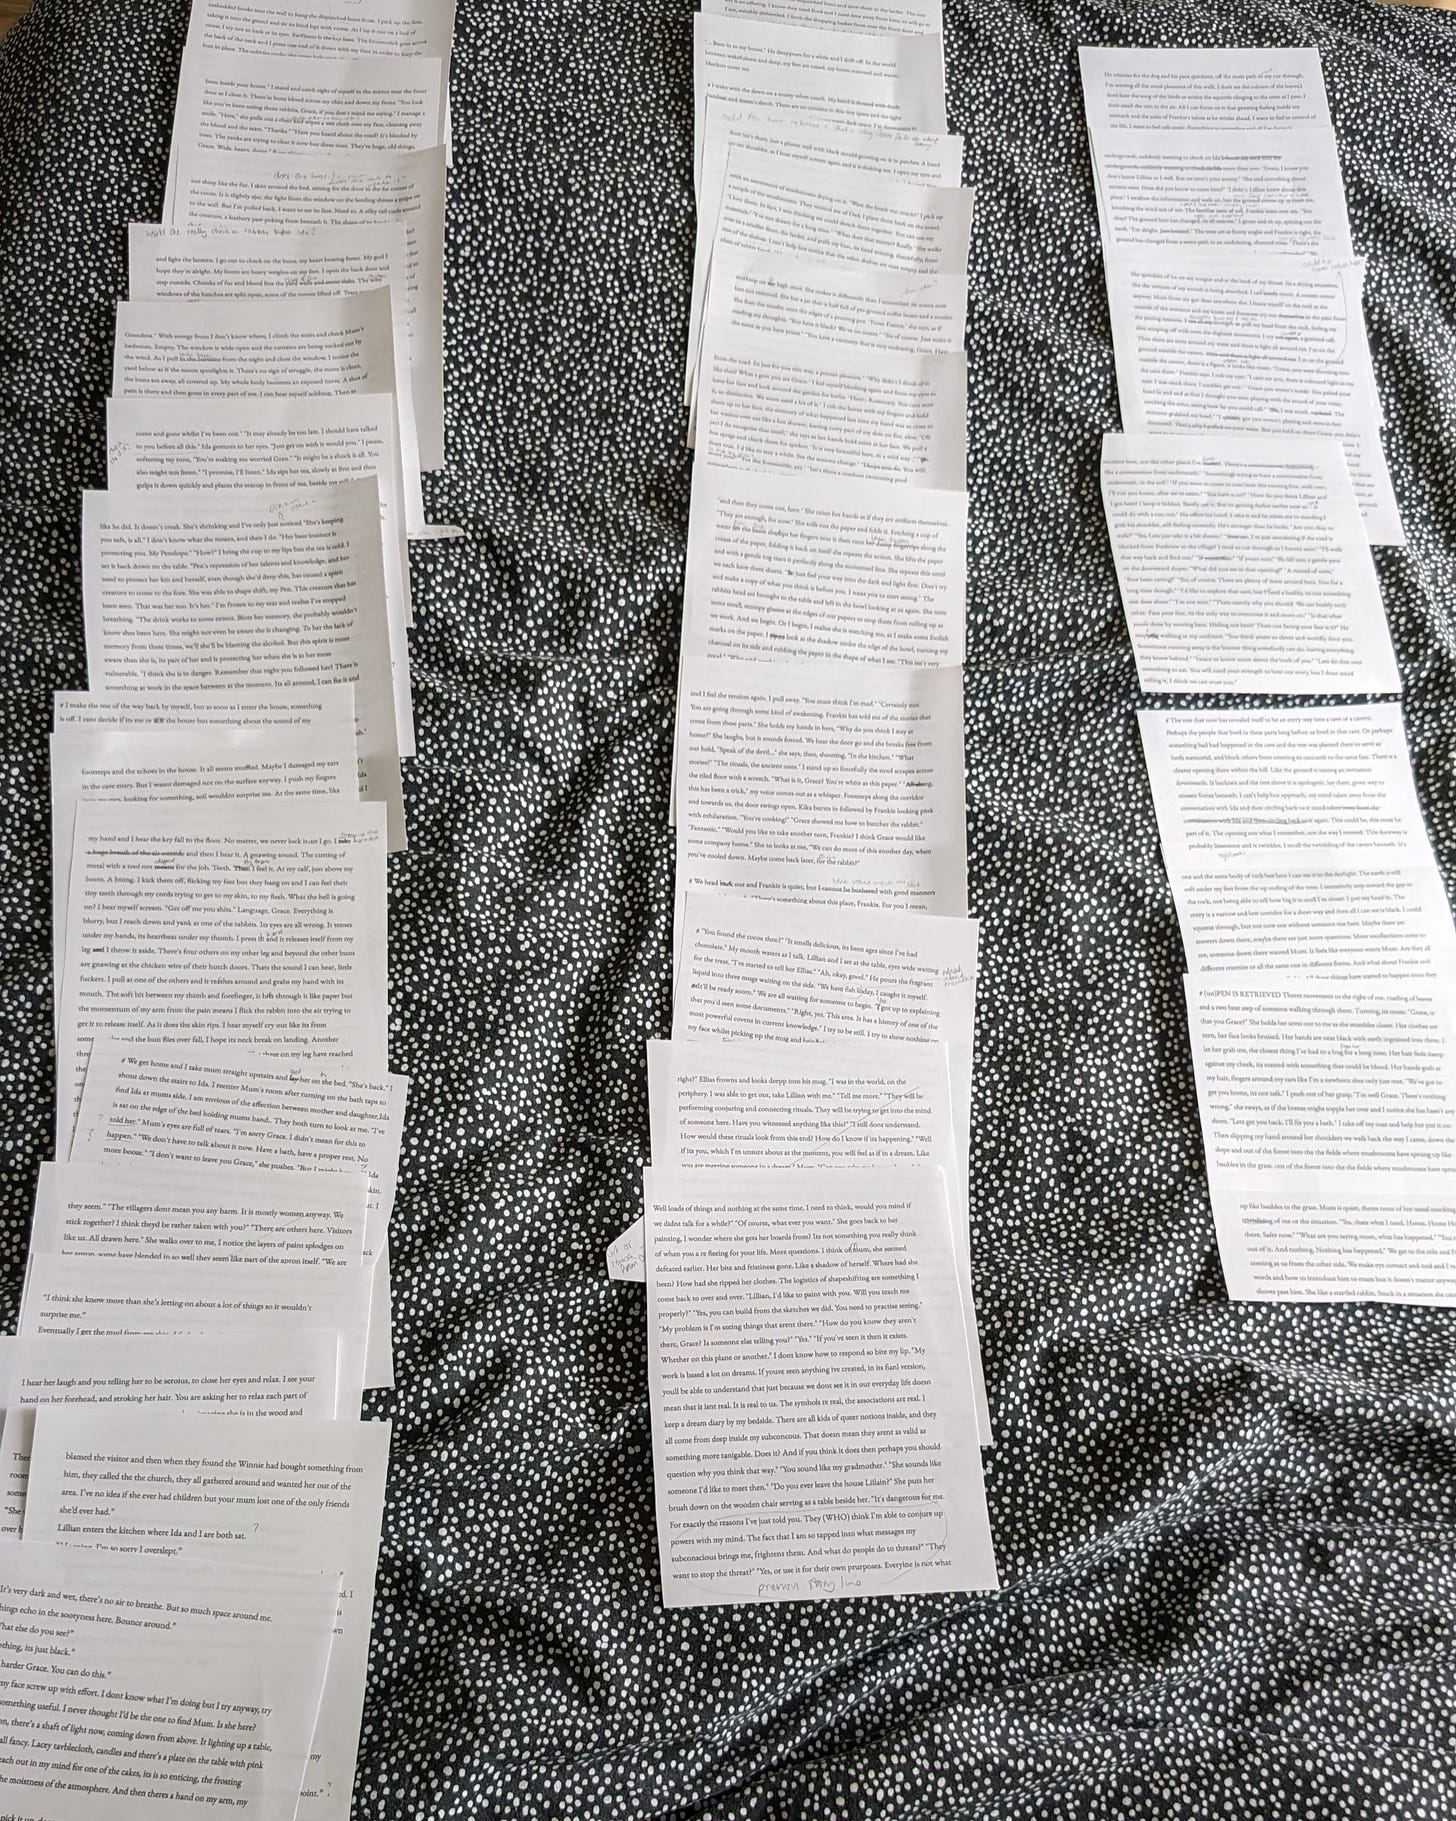 printed out pages of a manuscript to help with edits